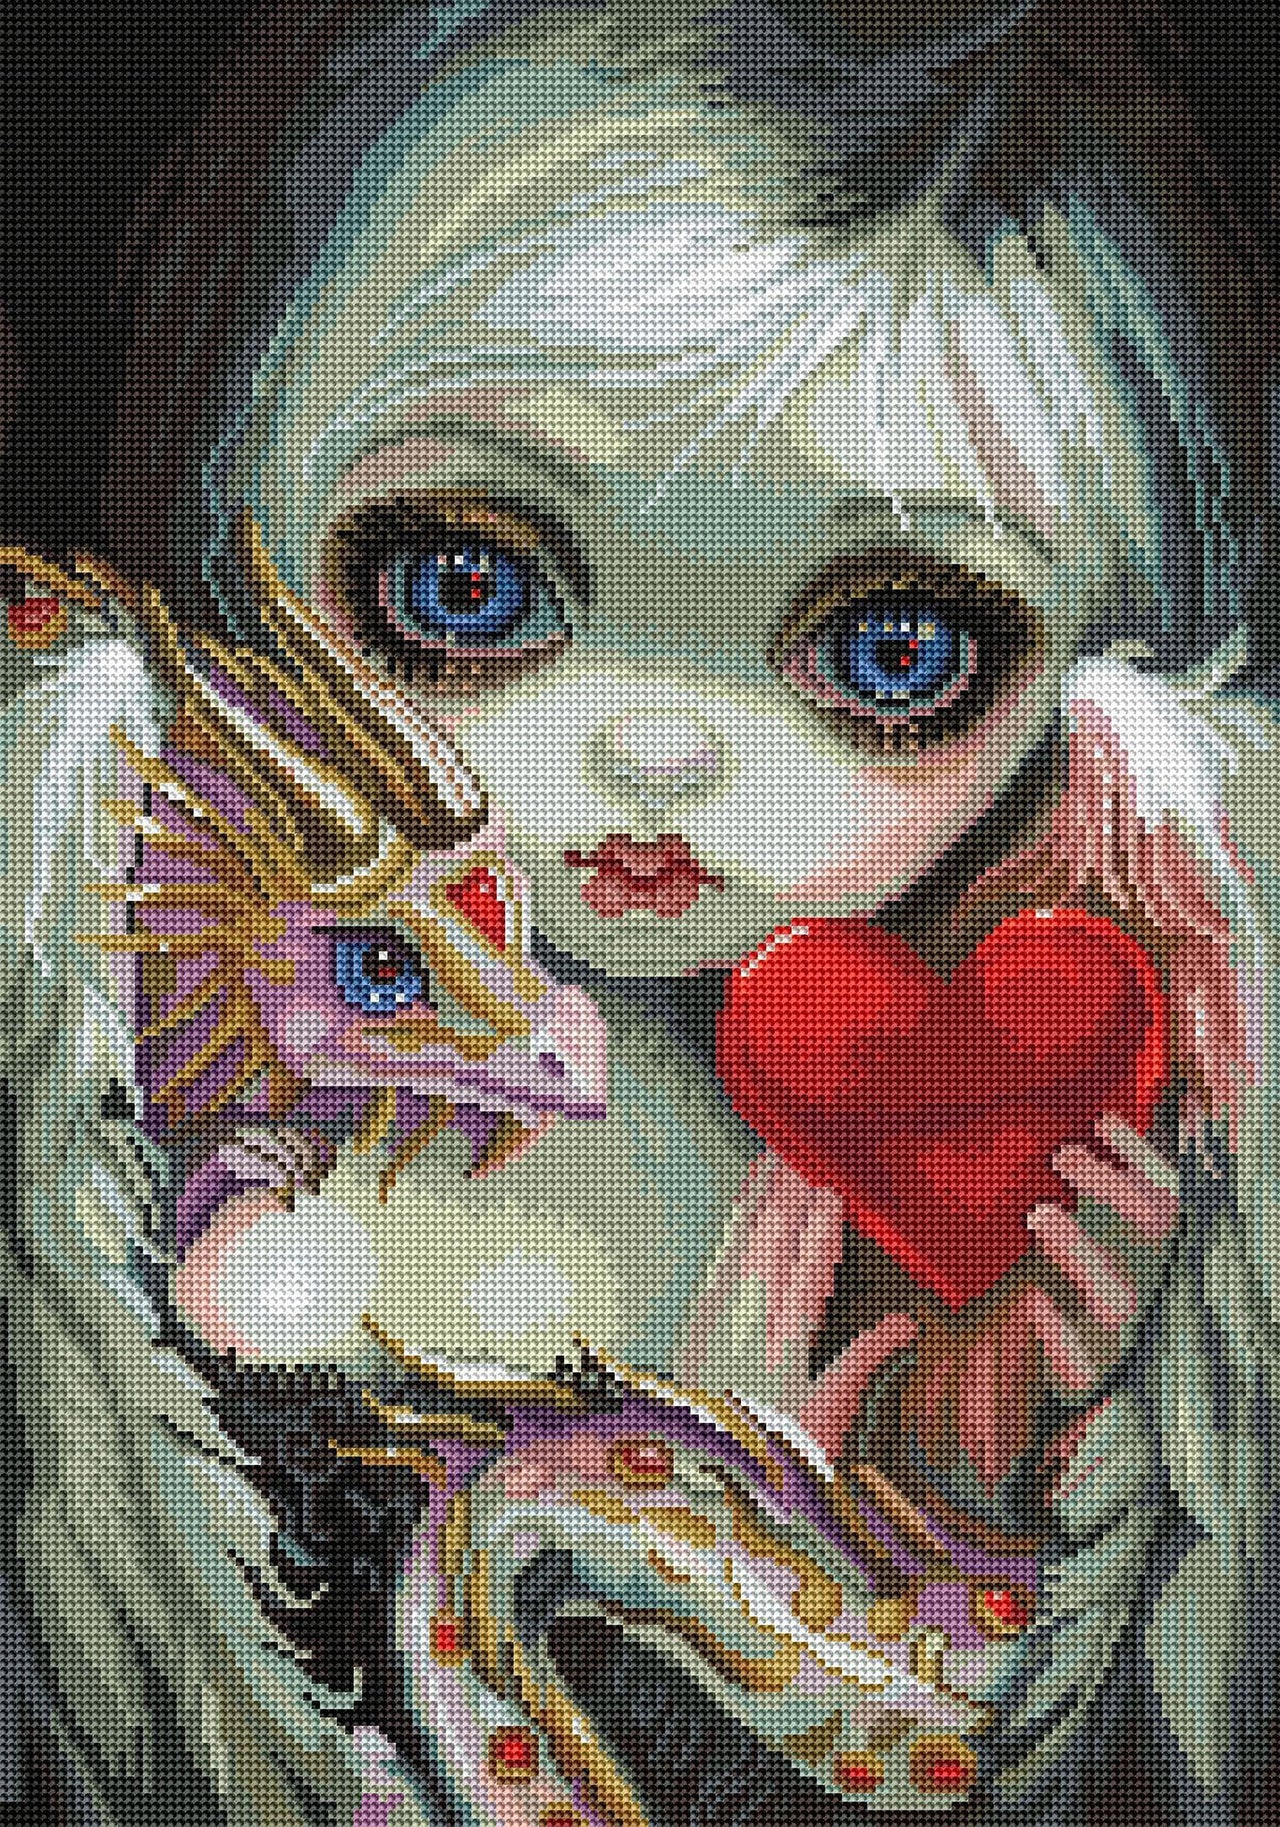 Diamond Painting A Dragonling Valentine 17" x 24" (43cm x 61cm) / Round with 56 Colors including 2 ABs / 32,984